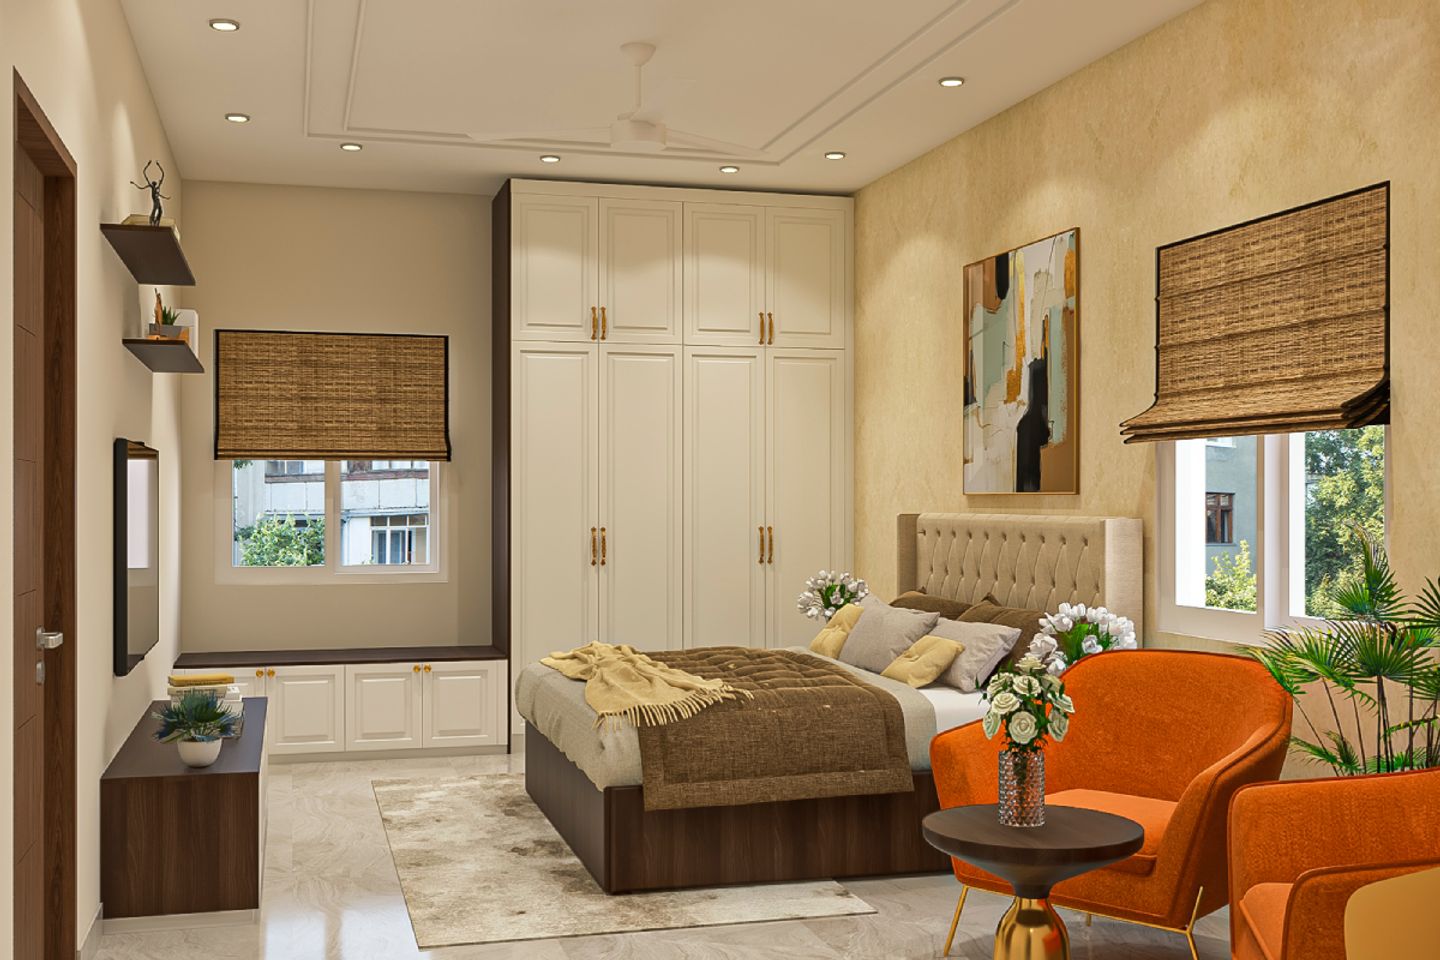 Spacious Master Bedroom Design With Orange Accent Chairs - Livspace